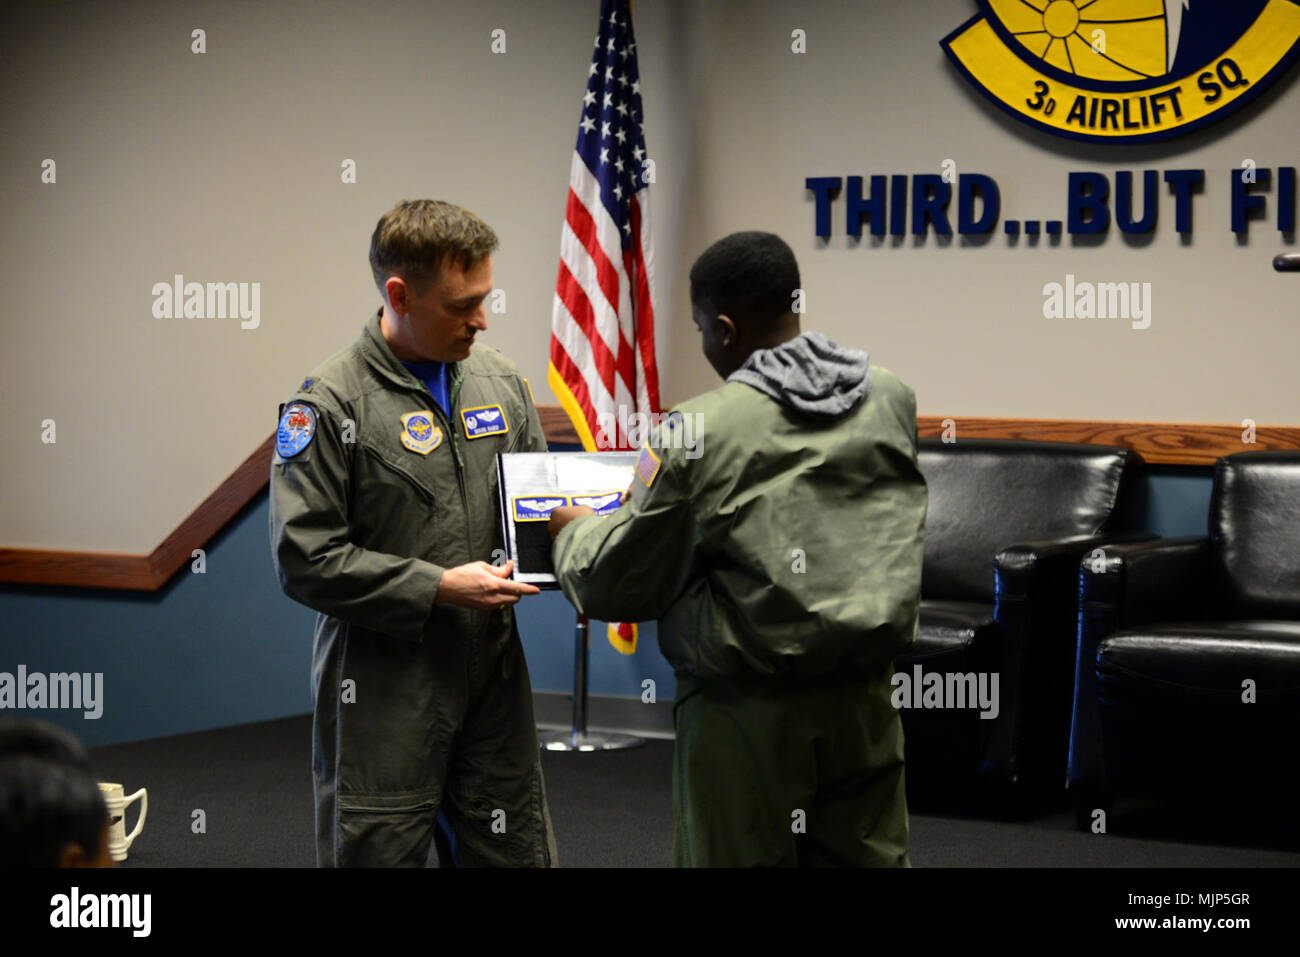 Lt. Col. Mark Radio, 3rd Airlift Squadron commander, holds the Pilot for a Day plaque while Kareem Bennett affixes his nametape to it during a squadron roll call March 16, 2018, at Dover Air Force Base, Del. Flying squadrons traditionally hold a ceremony for outgoing or retiring members that involves placing their nametape on a board to commemorate their service to the organization. Armed Forces and civilians displaying courage bravery dedication commitment and sacrifice Stock Photo